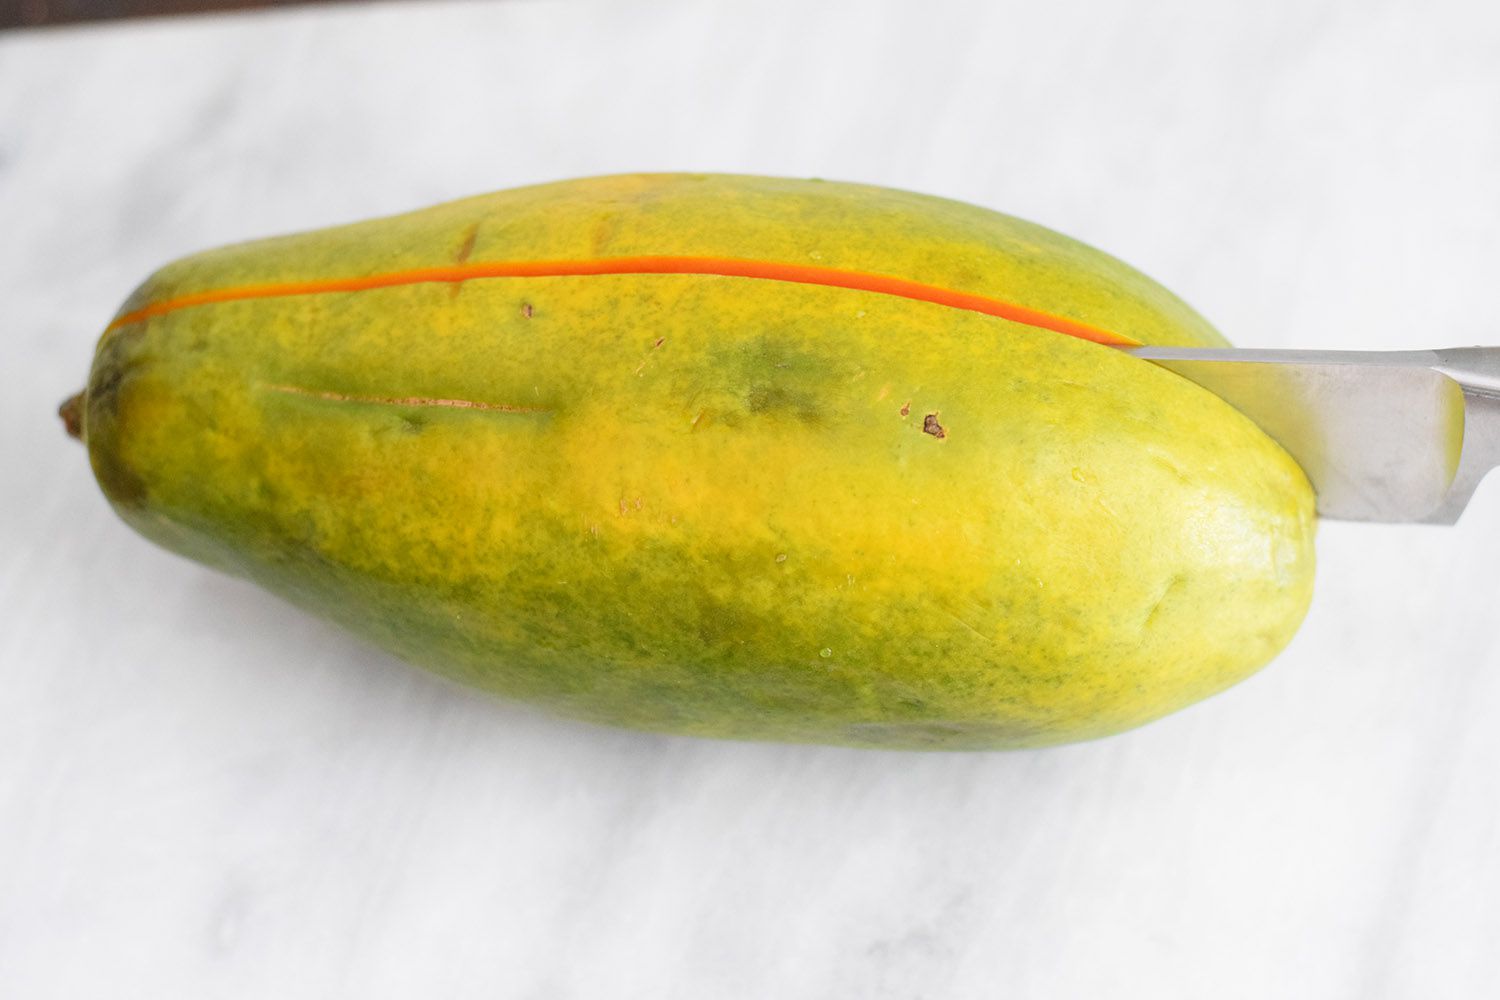 papaya being cut in half with knife